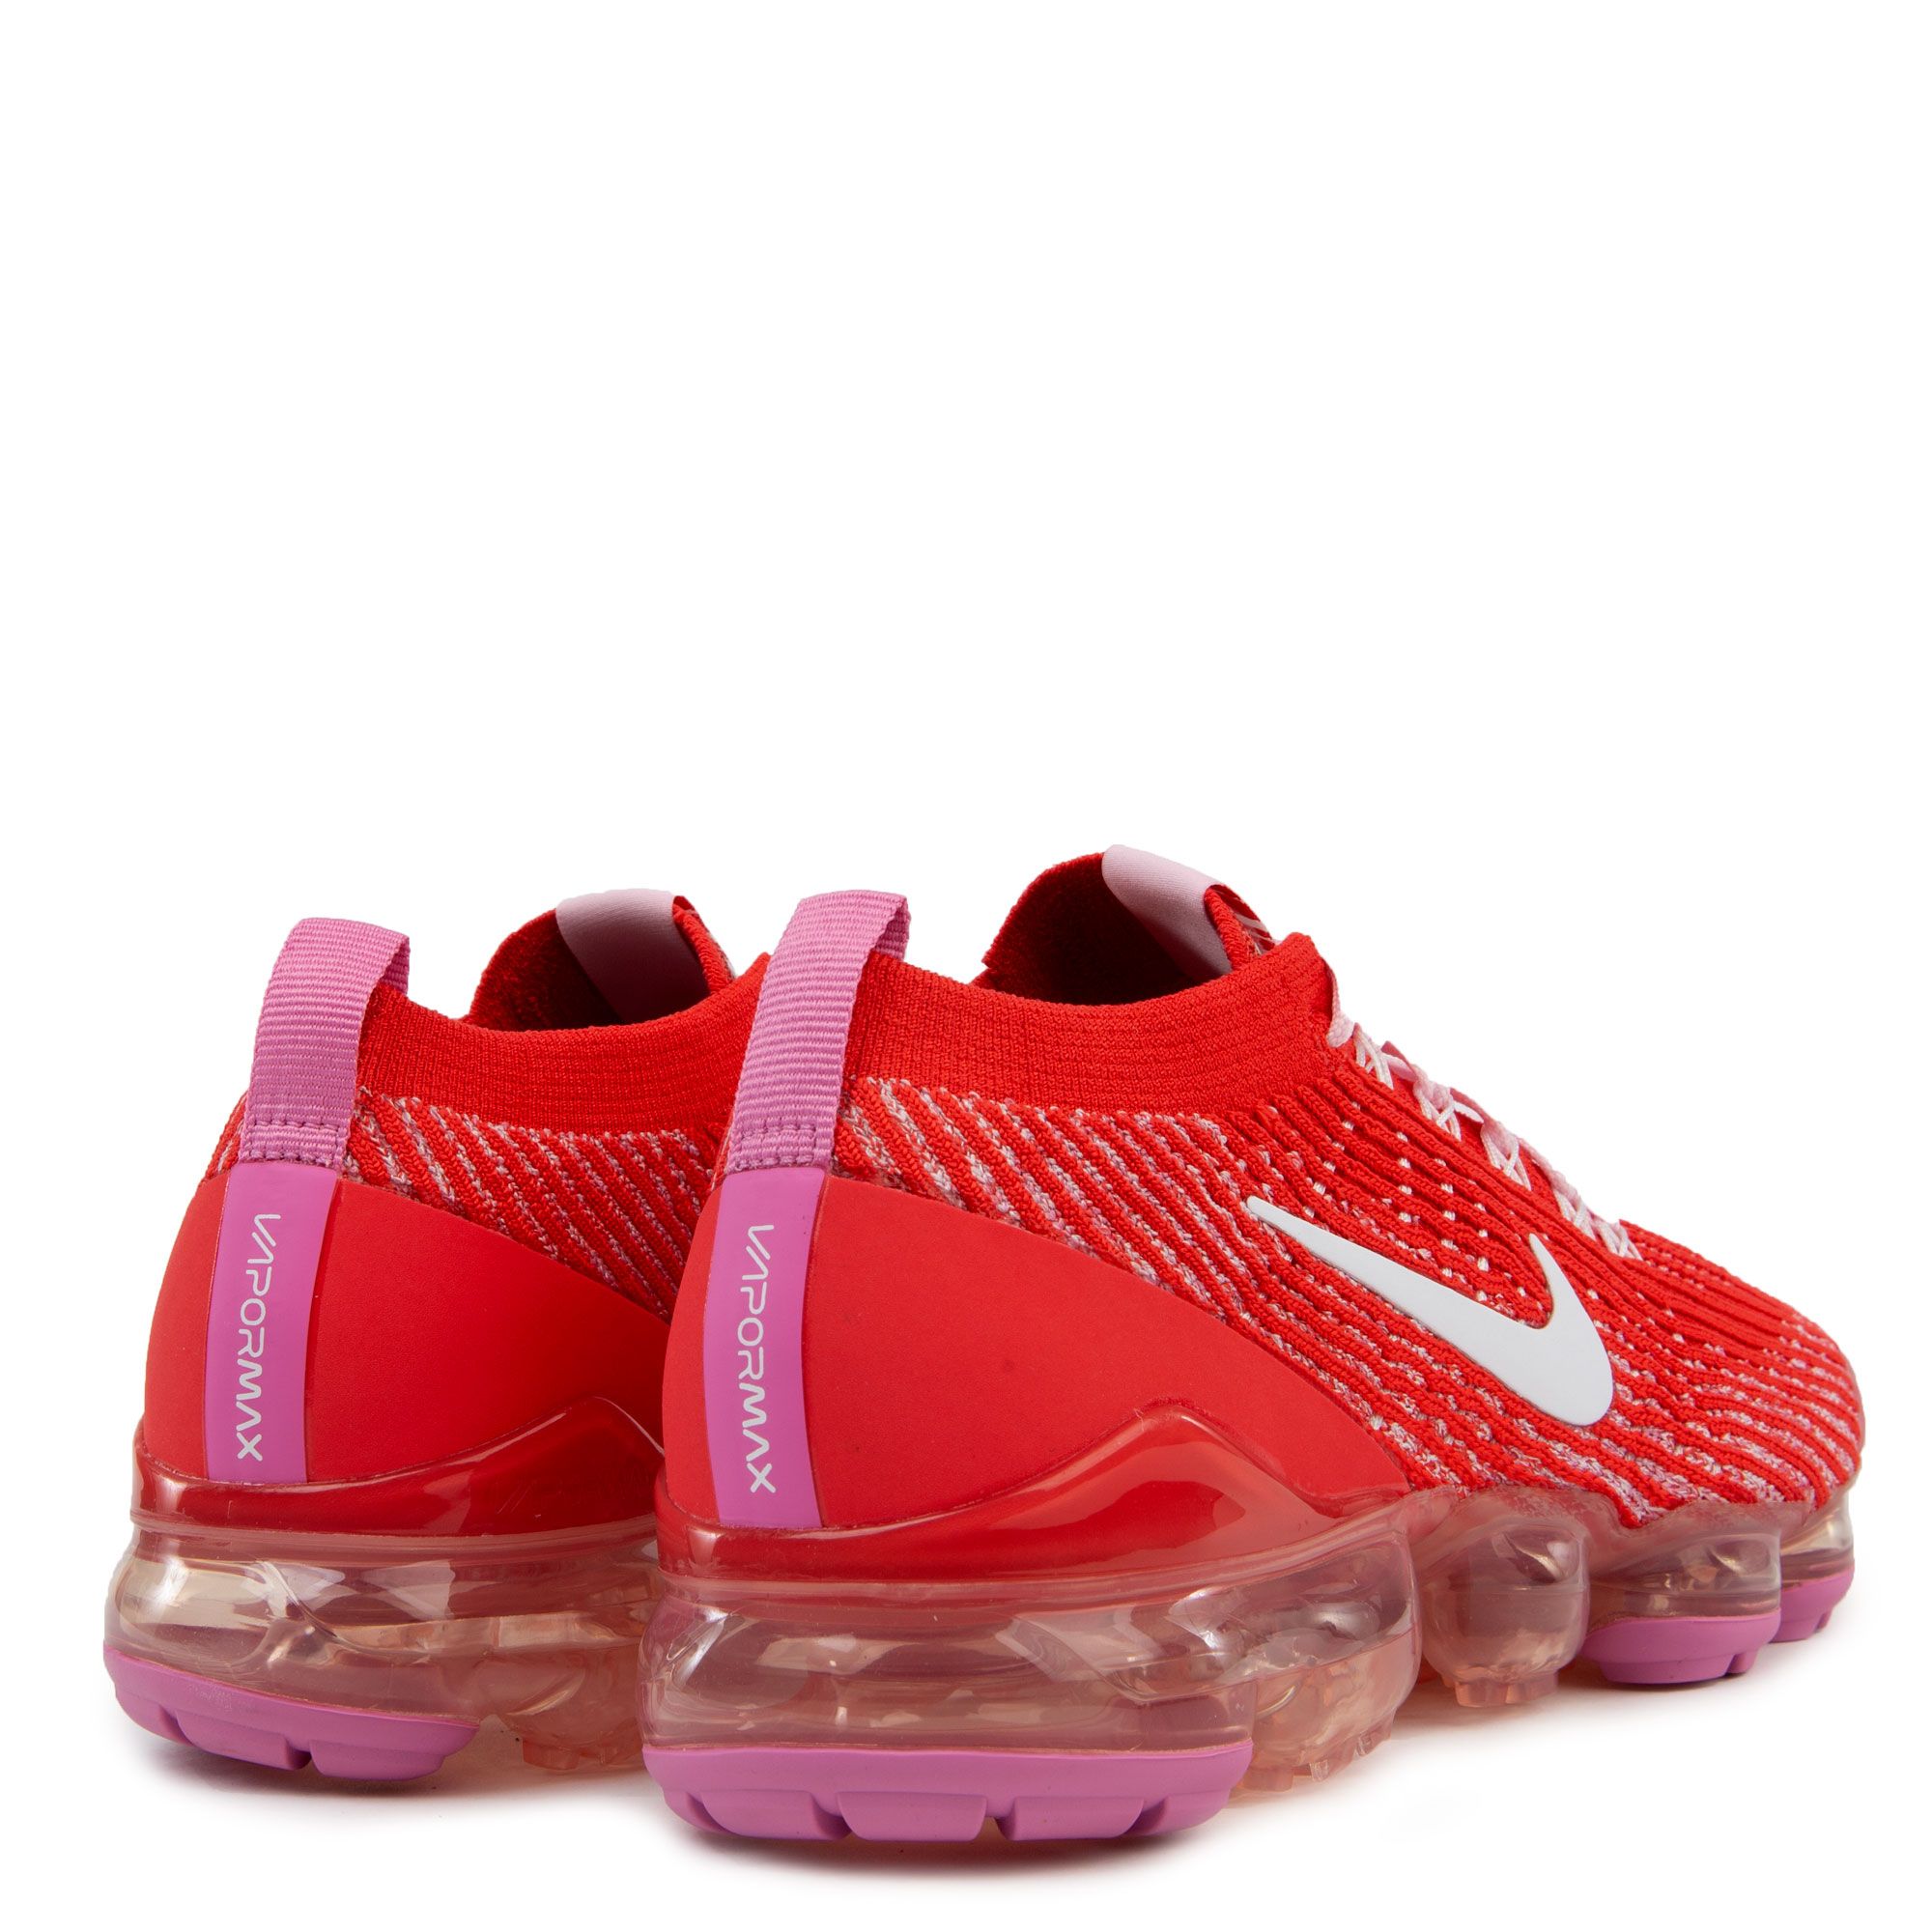 Finish Line - Pretty in pink 💞. Shop Nike Air VaporMax Flyknit 3